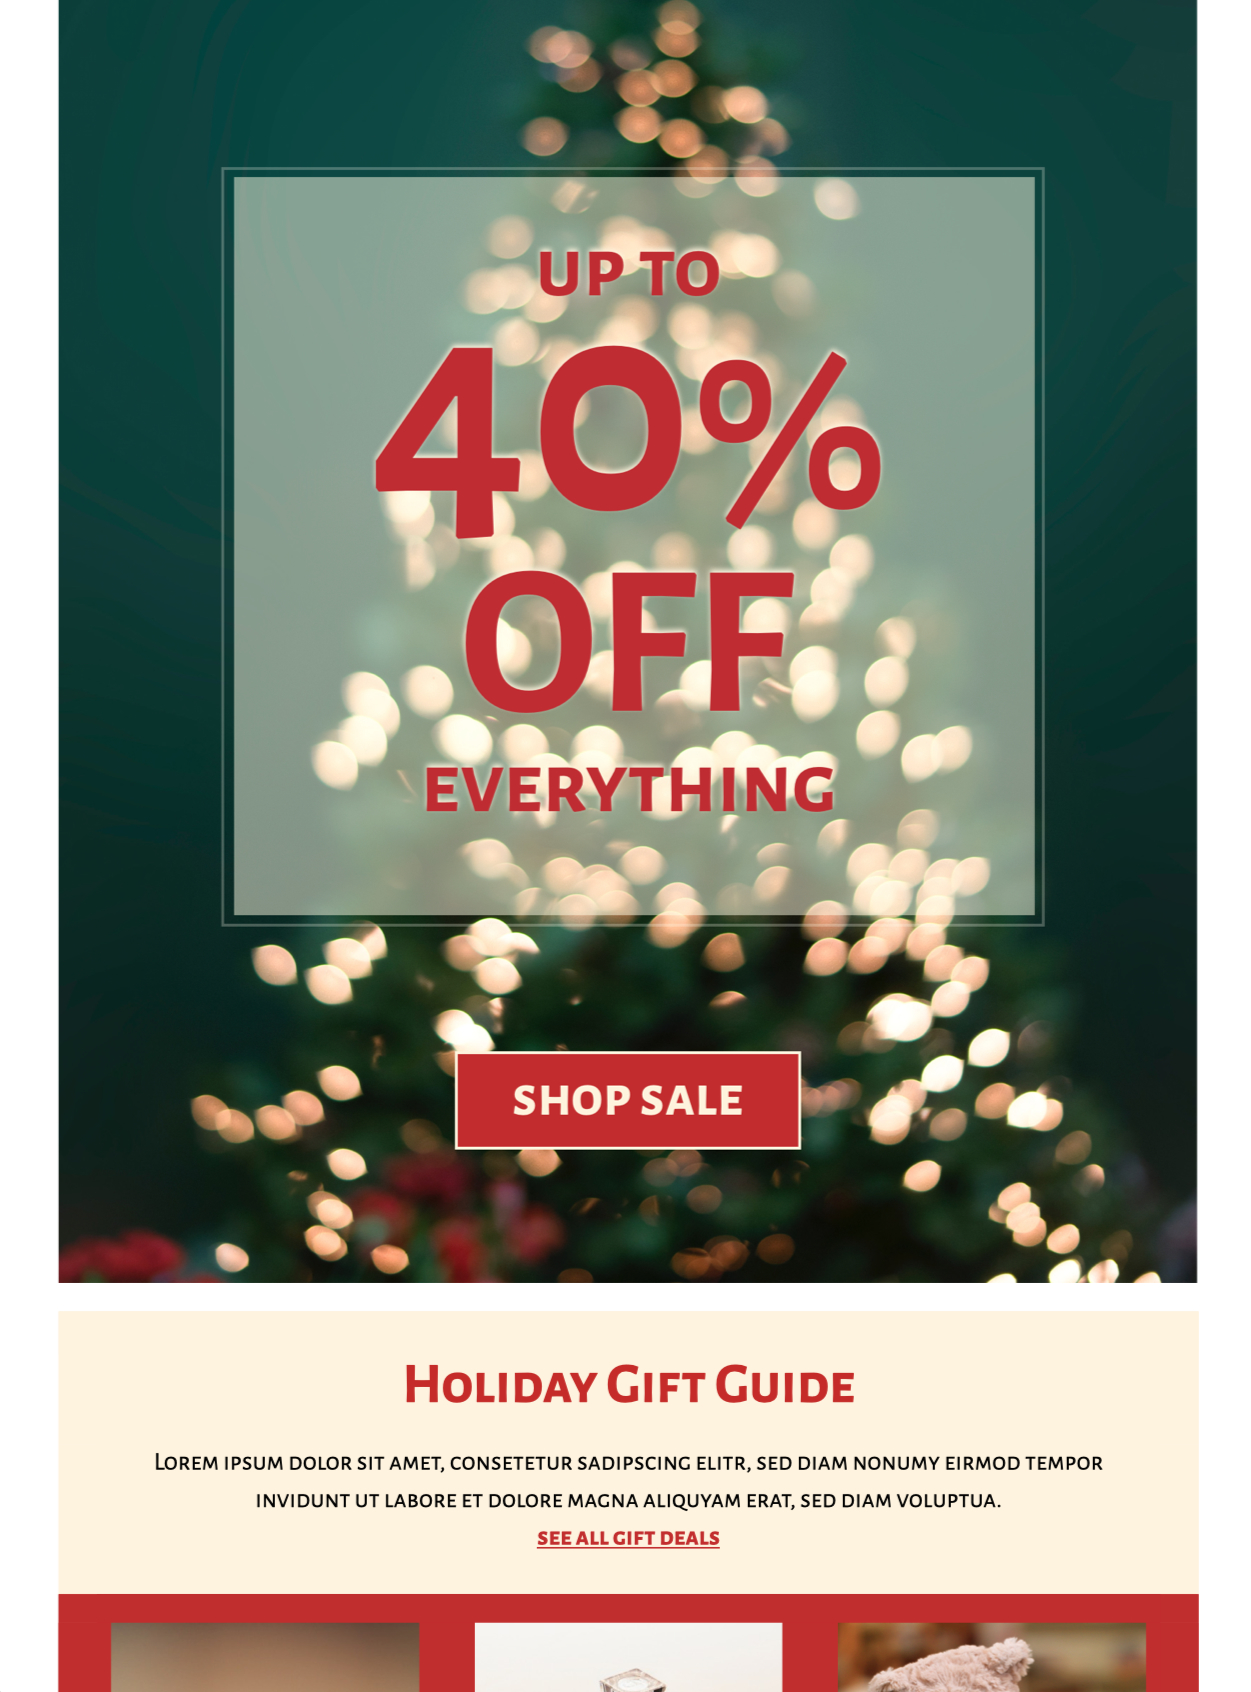 Holiday sale HTML email template